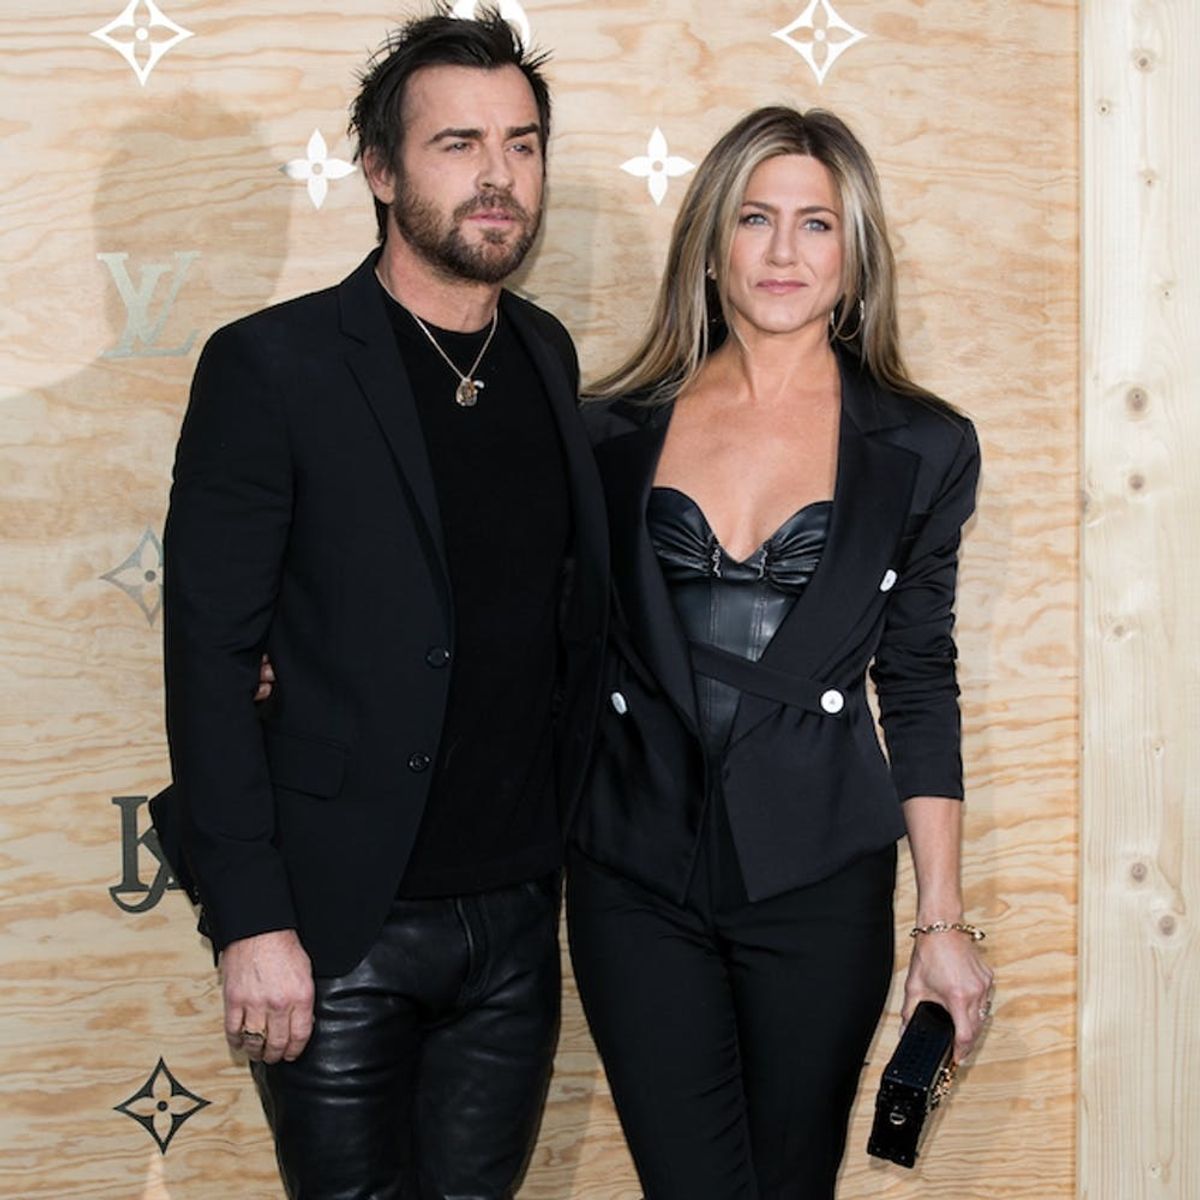 Jennifer Aniston, Justin Theroux, and Their Matching Outfits Are #RelationshipGoals